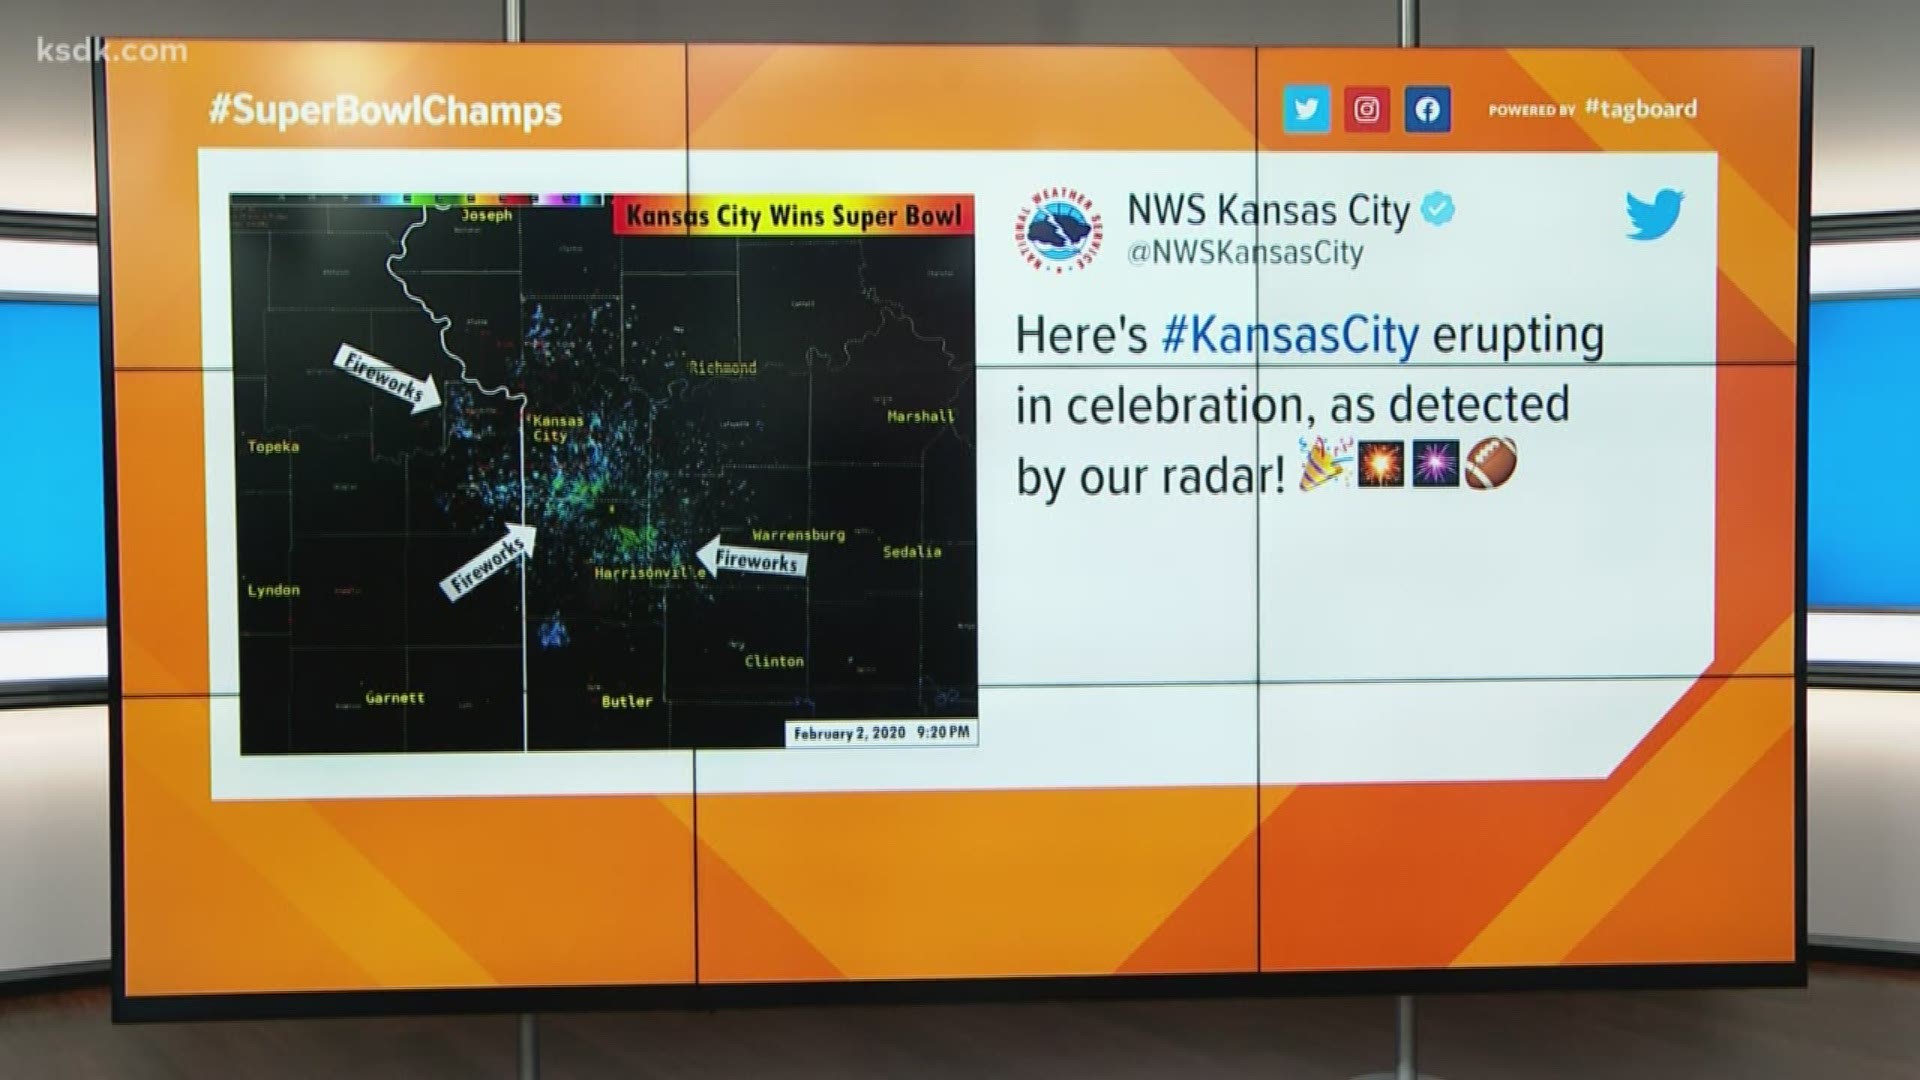 The National Weather Service radar caught fireworks erupting all across Kansas City after the Chiefs won the Super Bowl